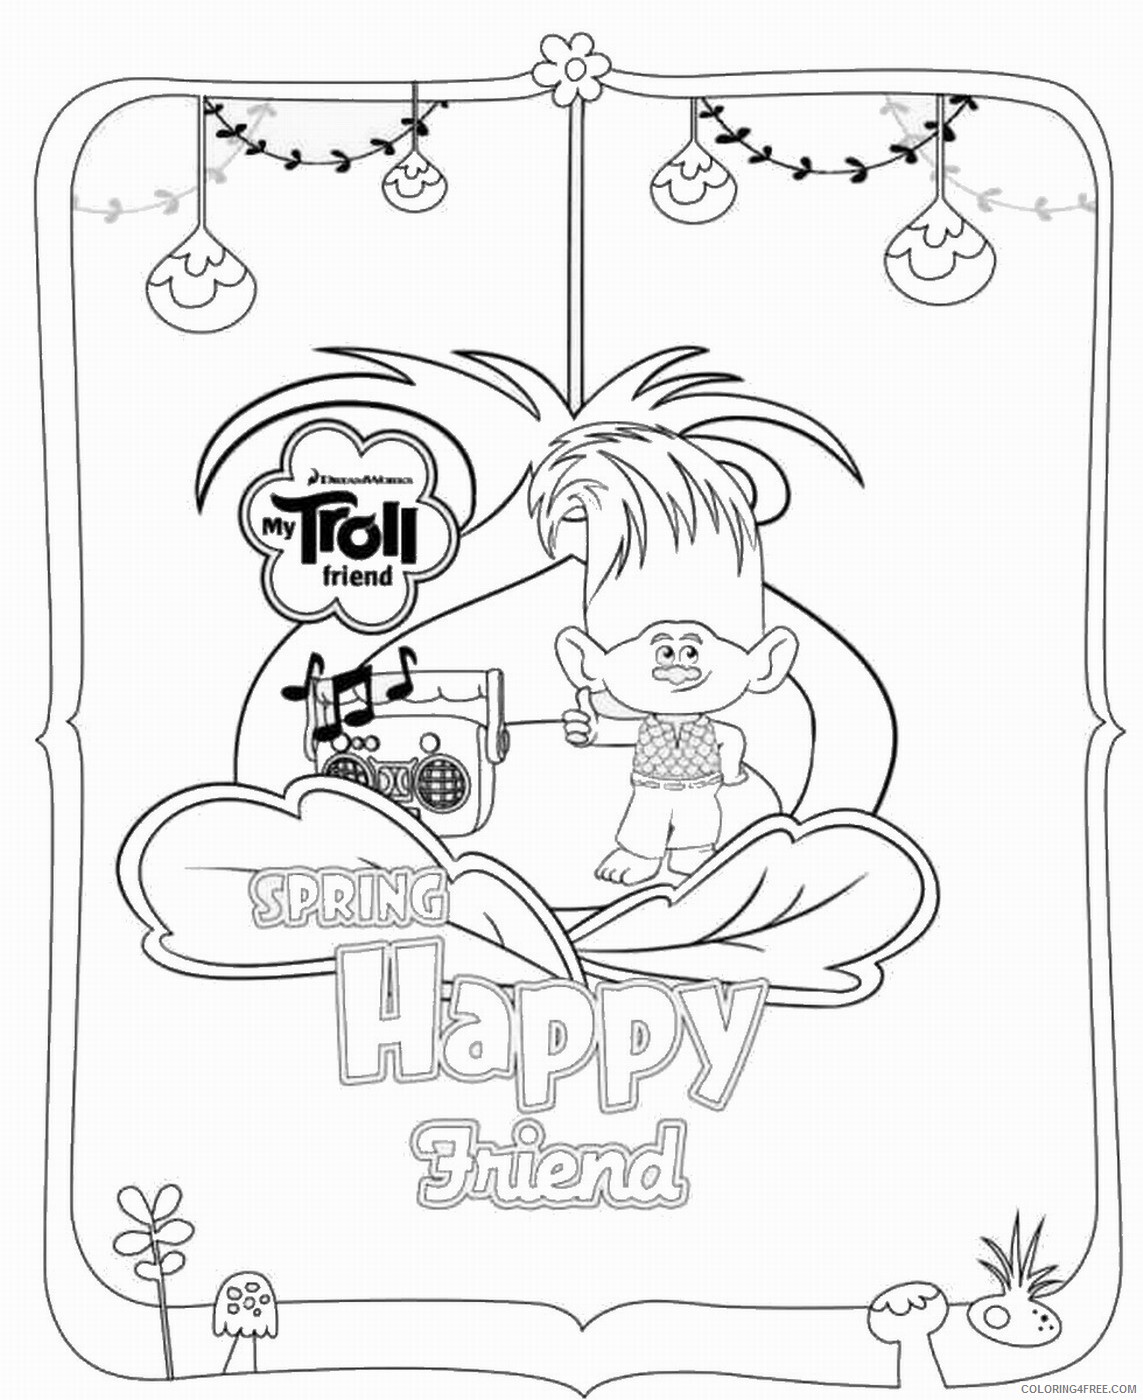 Trolls Coloring Pages TV Film trolls movie12 Printable 2020 10843 Coloring4free